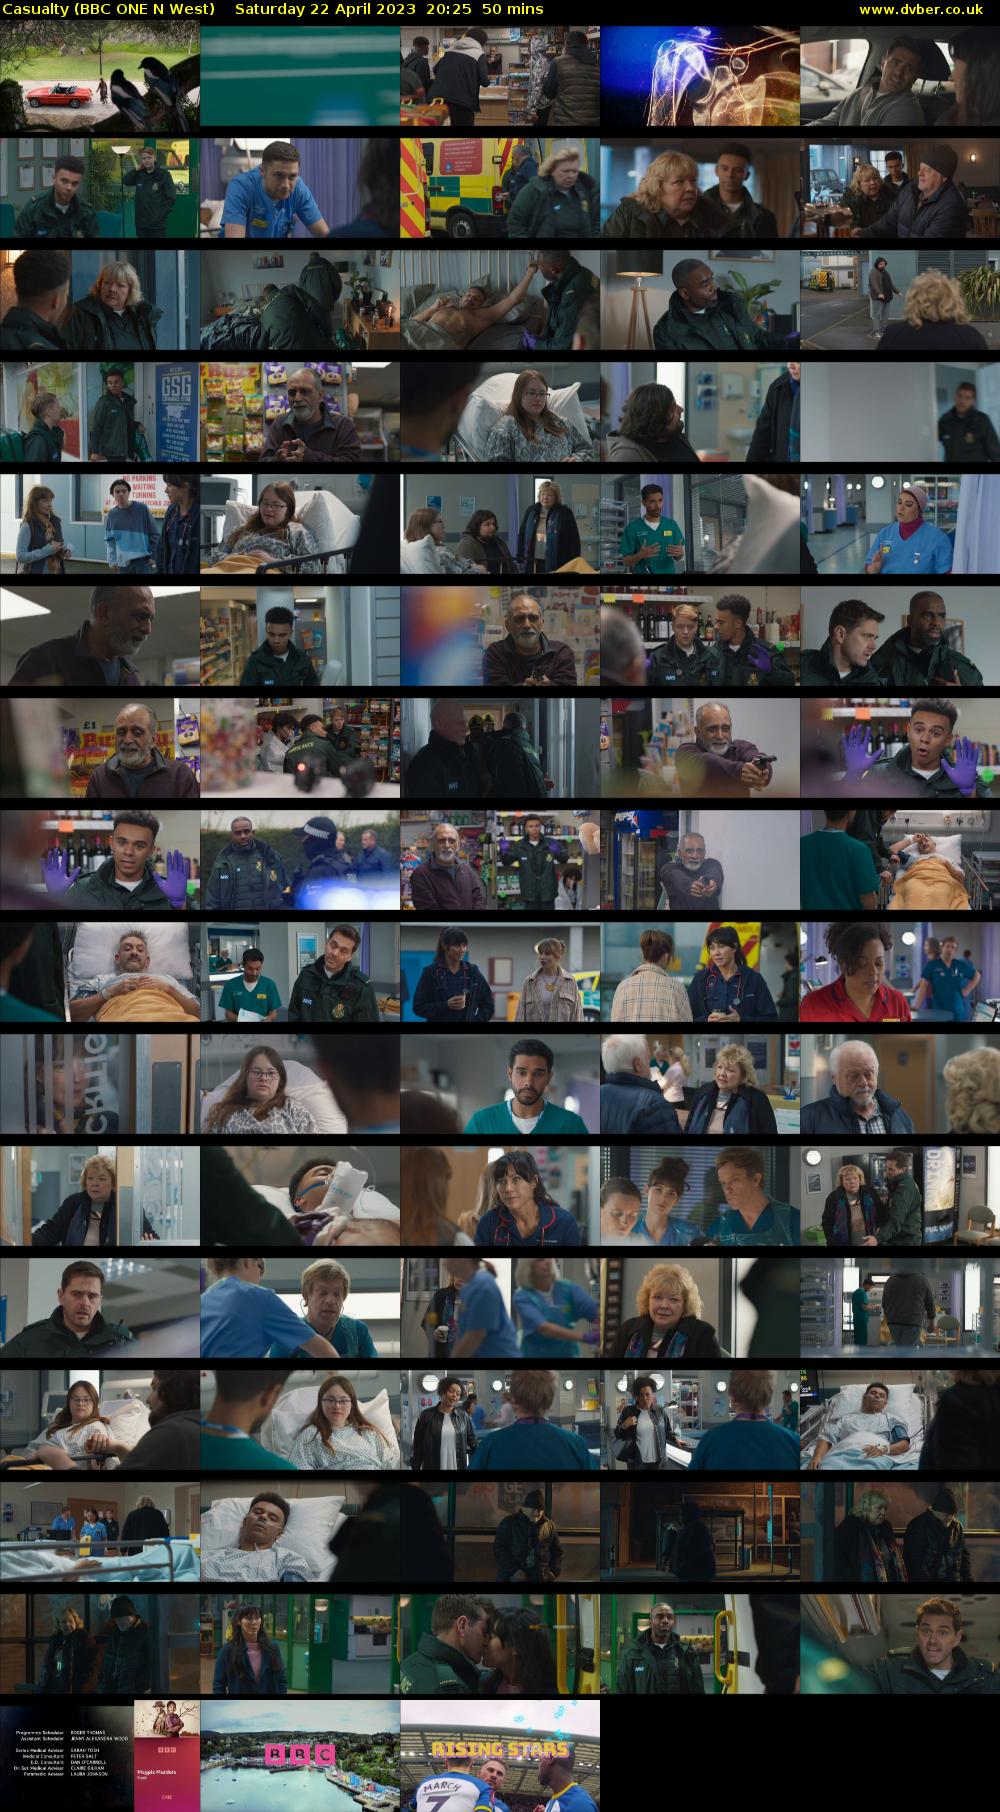 Casualty (BBC ONE N West) Saturday 22 April 2023 20:25 - 21:15